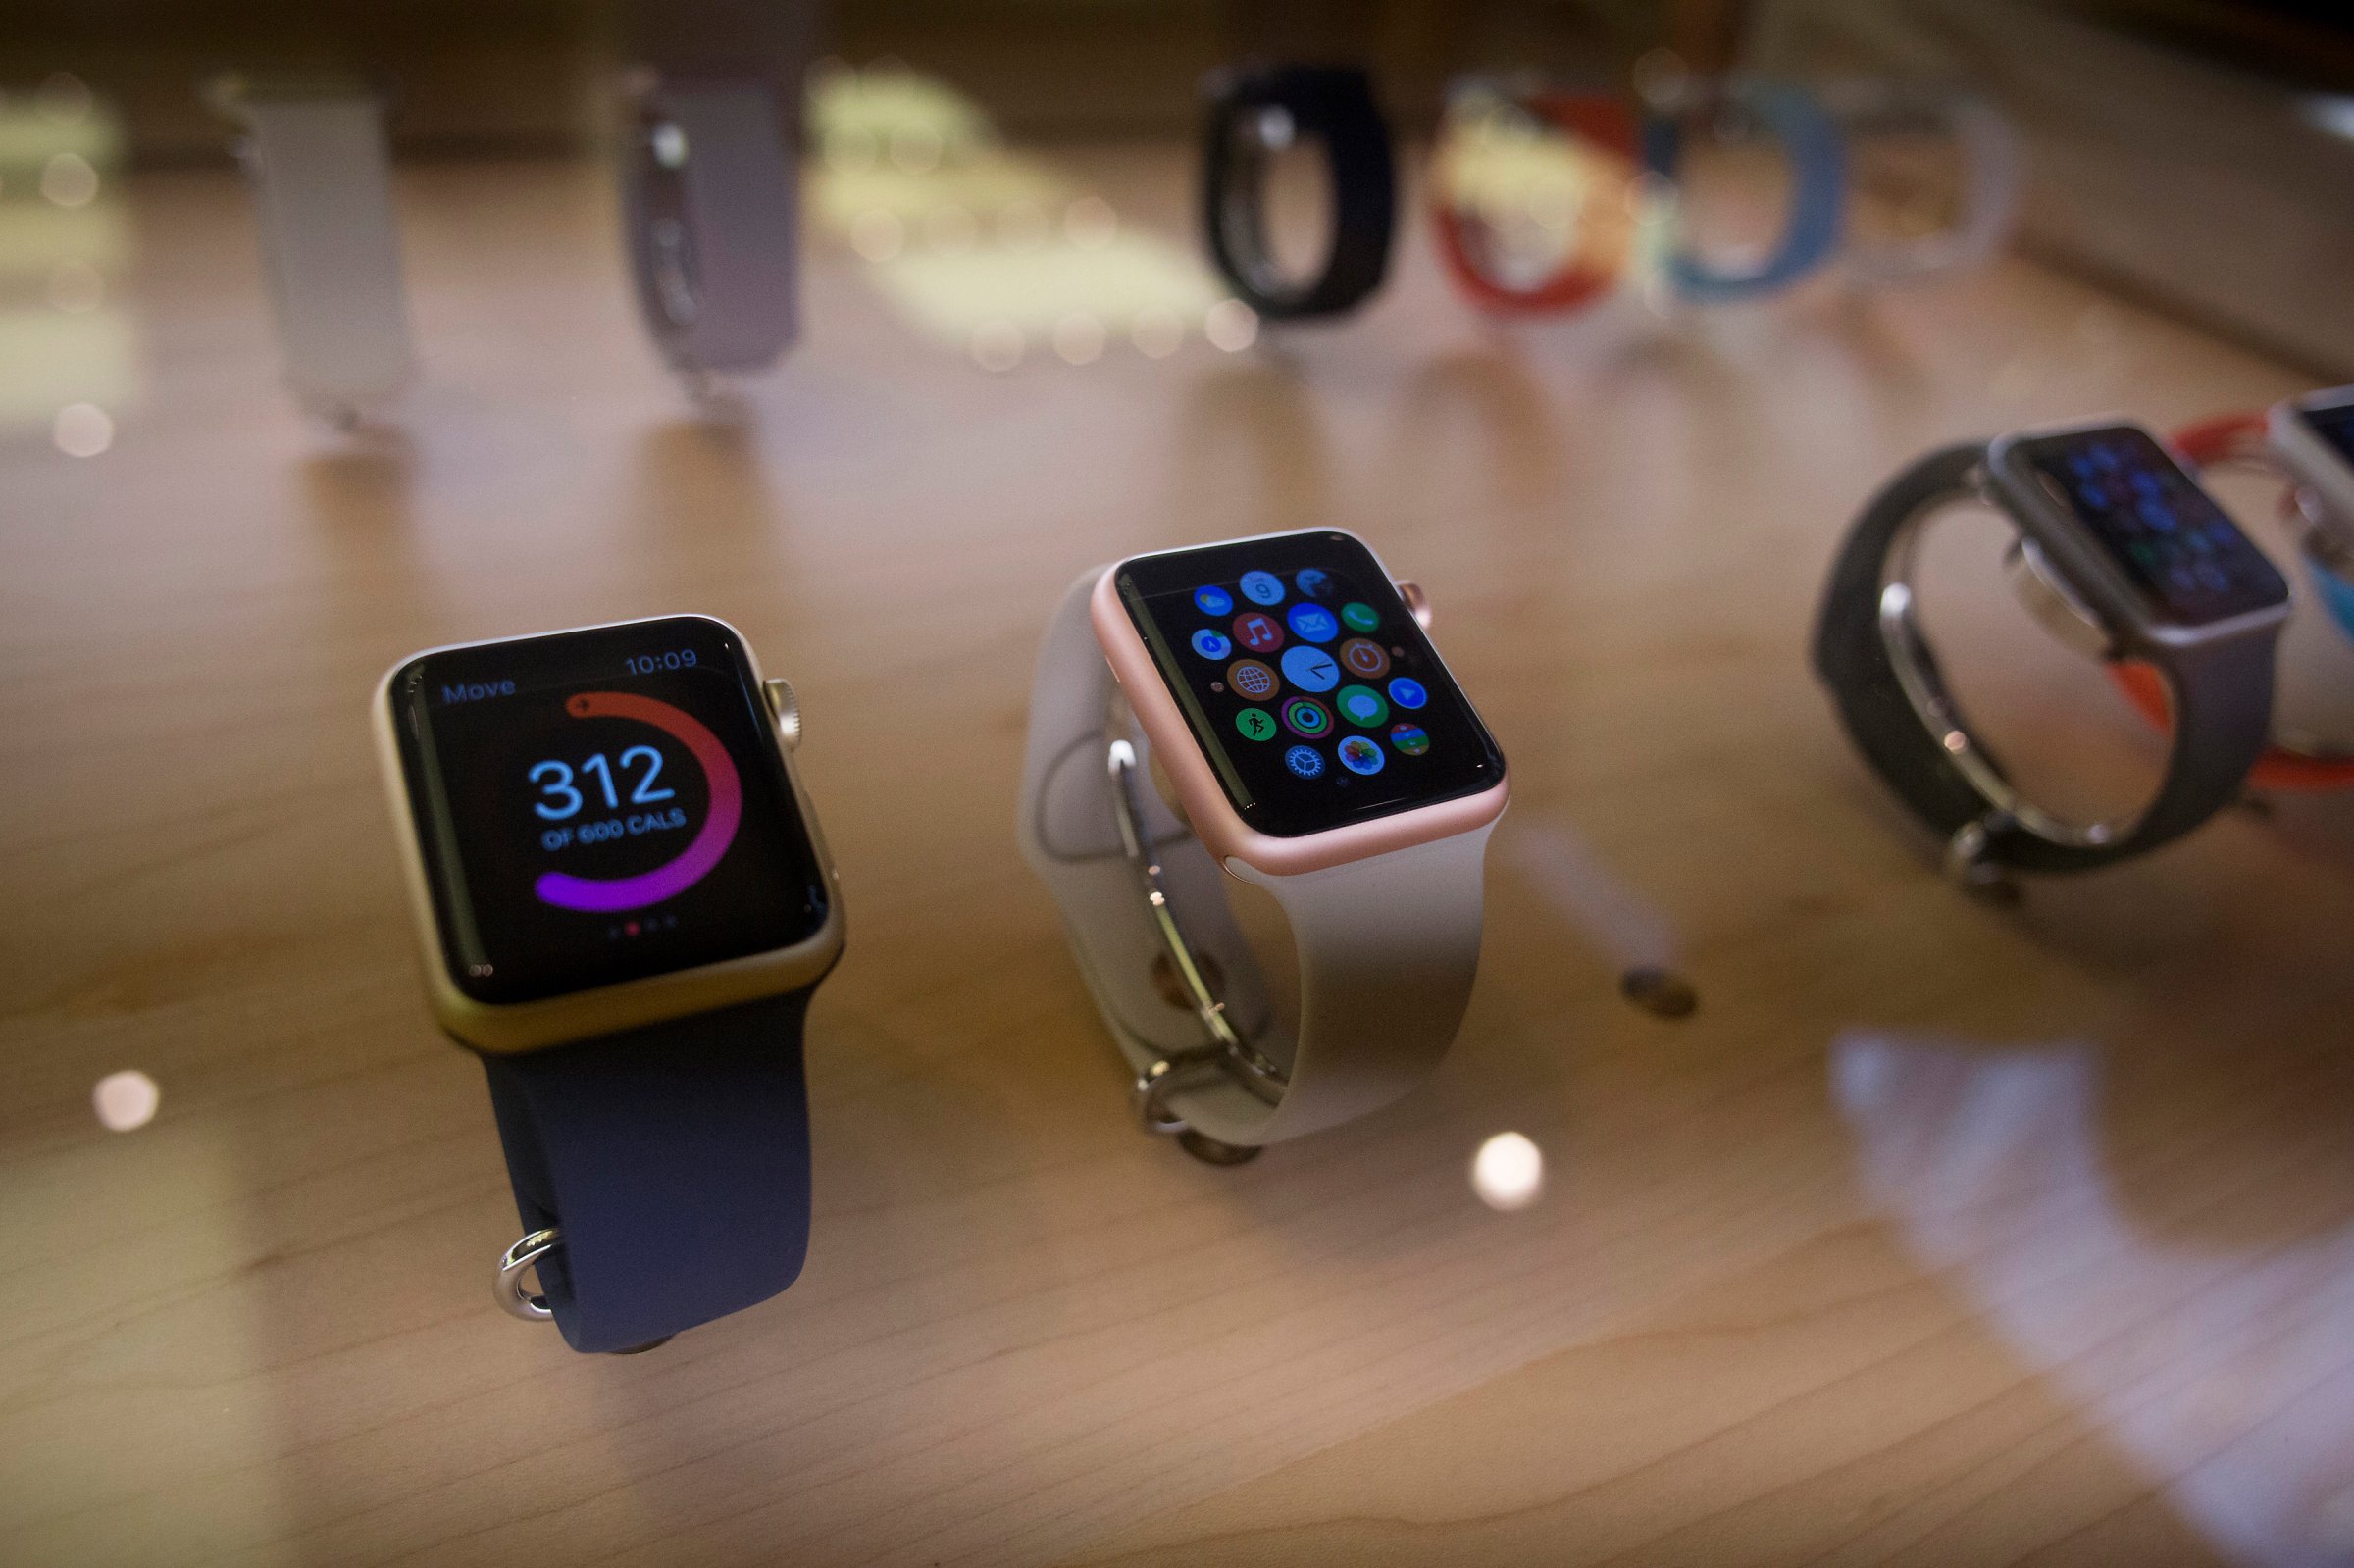 Apple Watch Sport devices in rose gold and gold finishes are displayed at an Apple Inc. store in New York, U.S., on Thursday, Sept. 10, 2015.